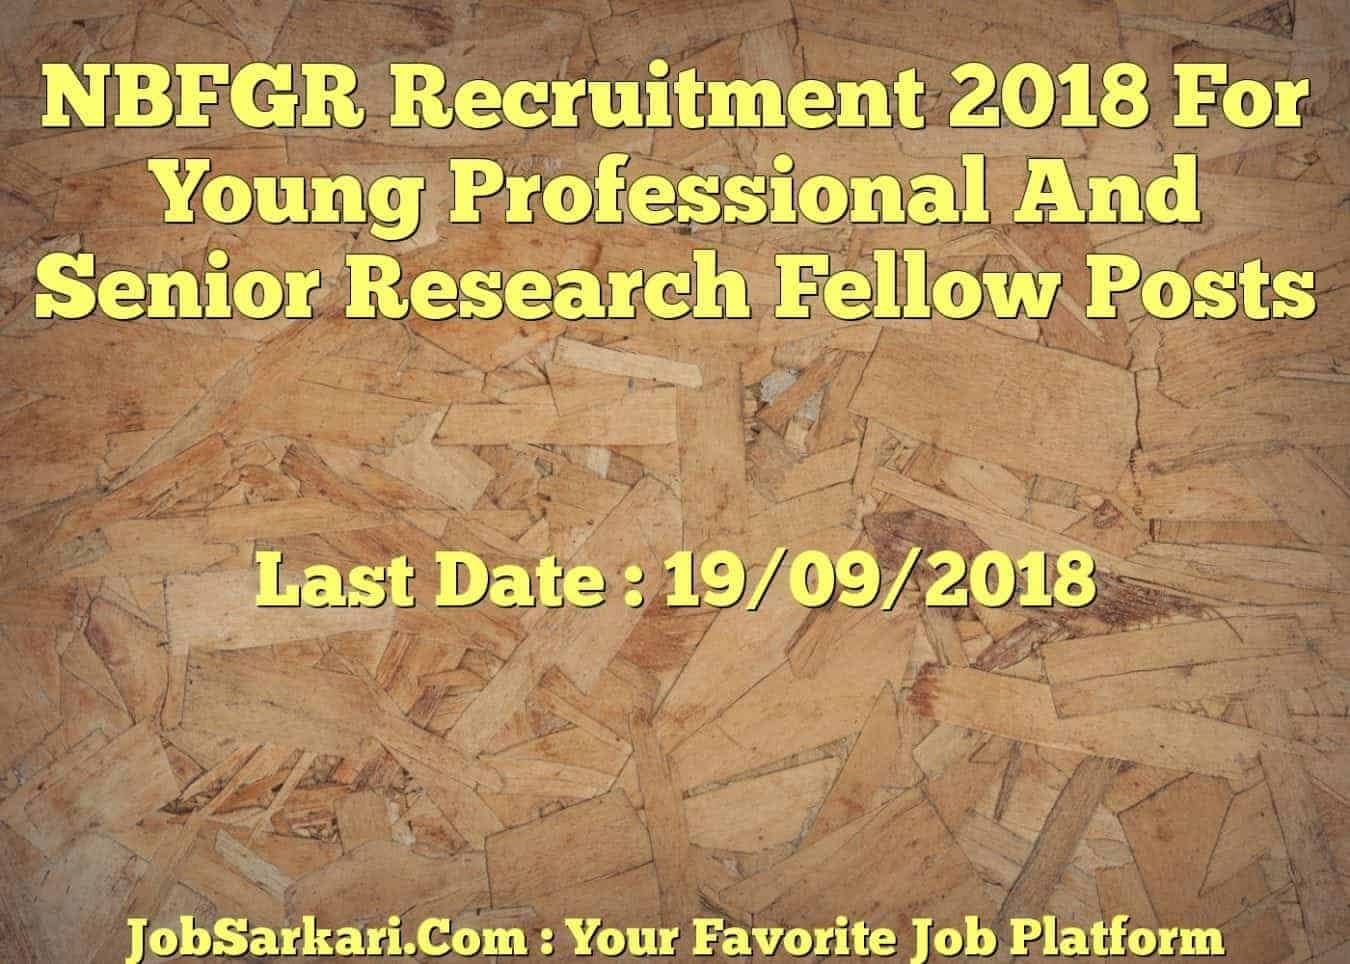 NBFGR Recruitment 2018 For Young Professional And Senior Research Fellow Posts